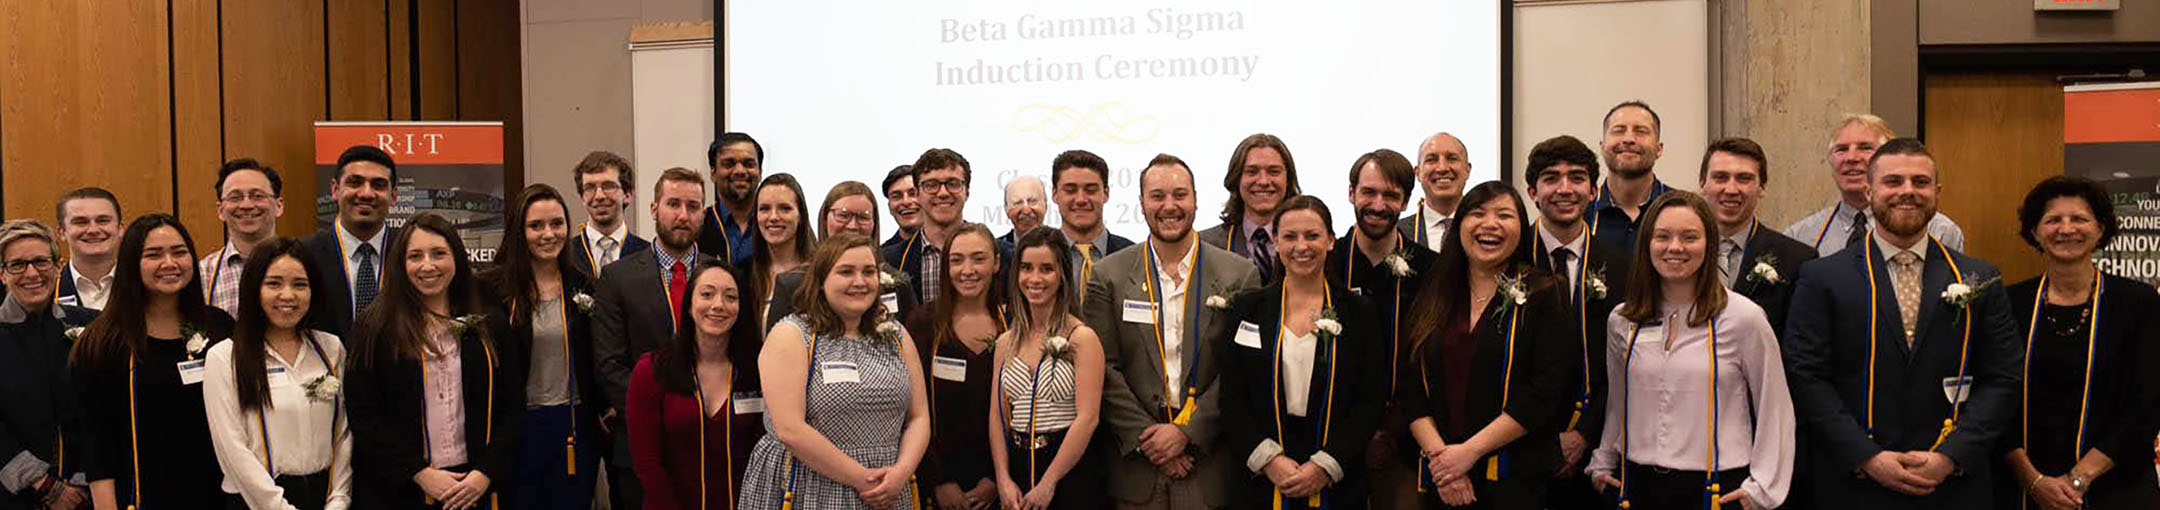 Beta Gamma Sigma, National Honor Society in Business Management